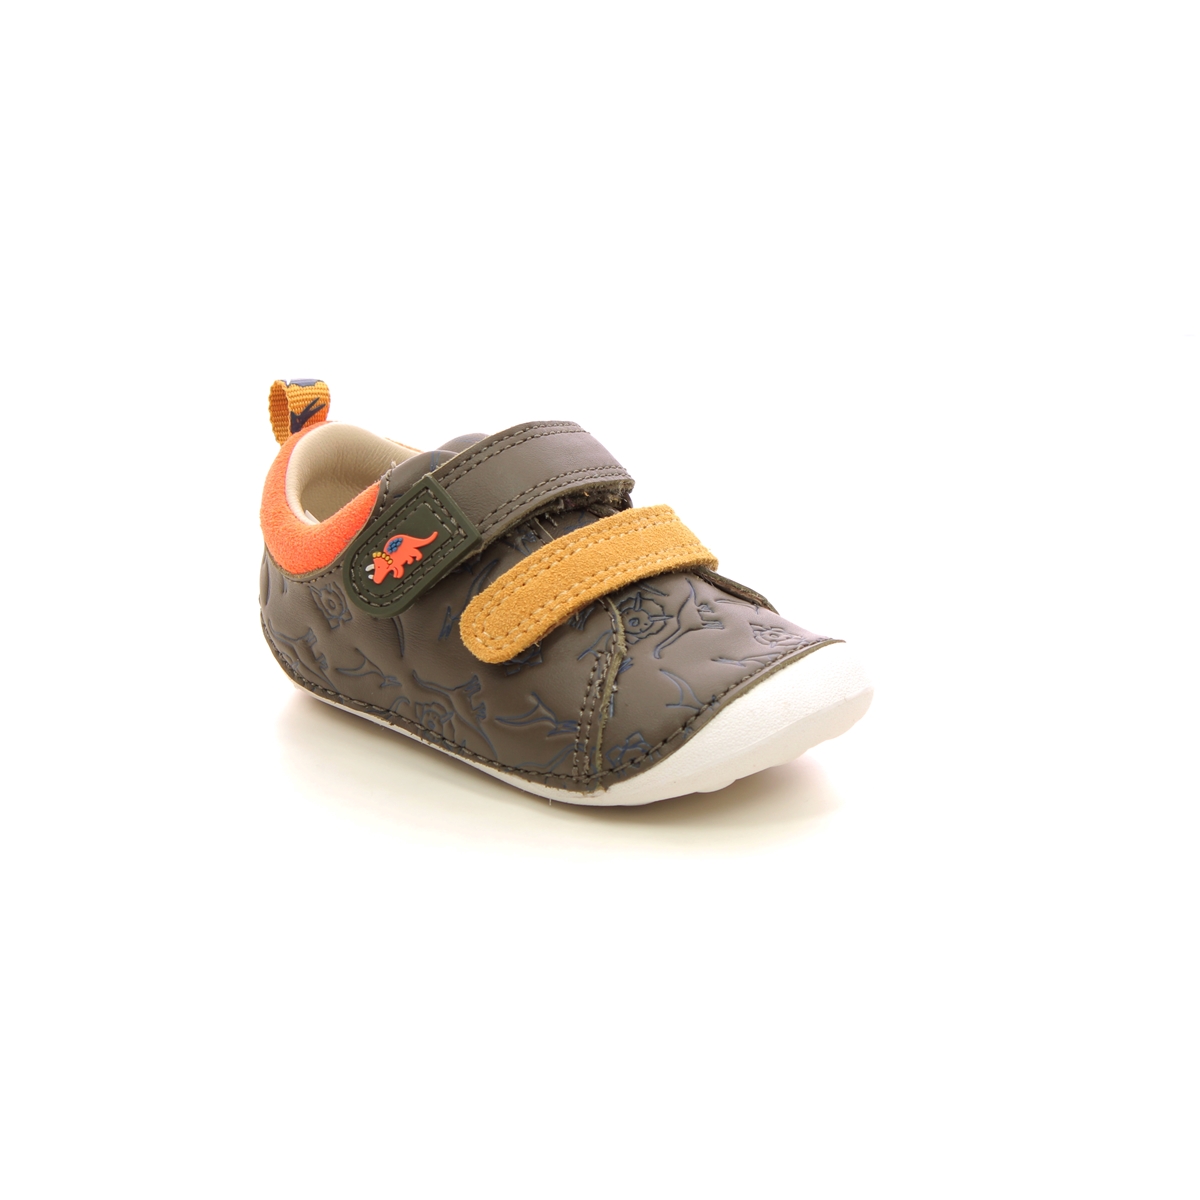 Clarks Tiny Rex T Khaki Leather Kids Boys First Shoes 7229-67G in a Plain Leather in Size 5